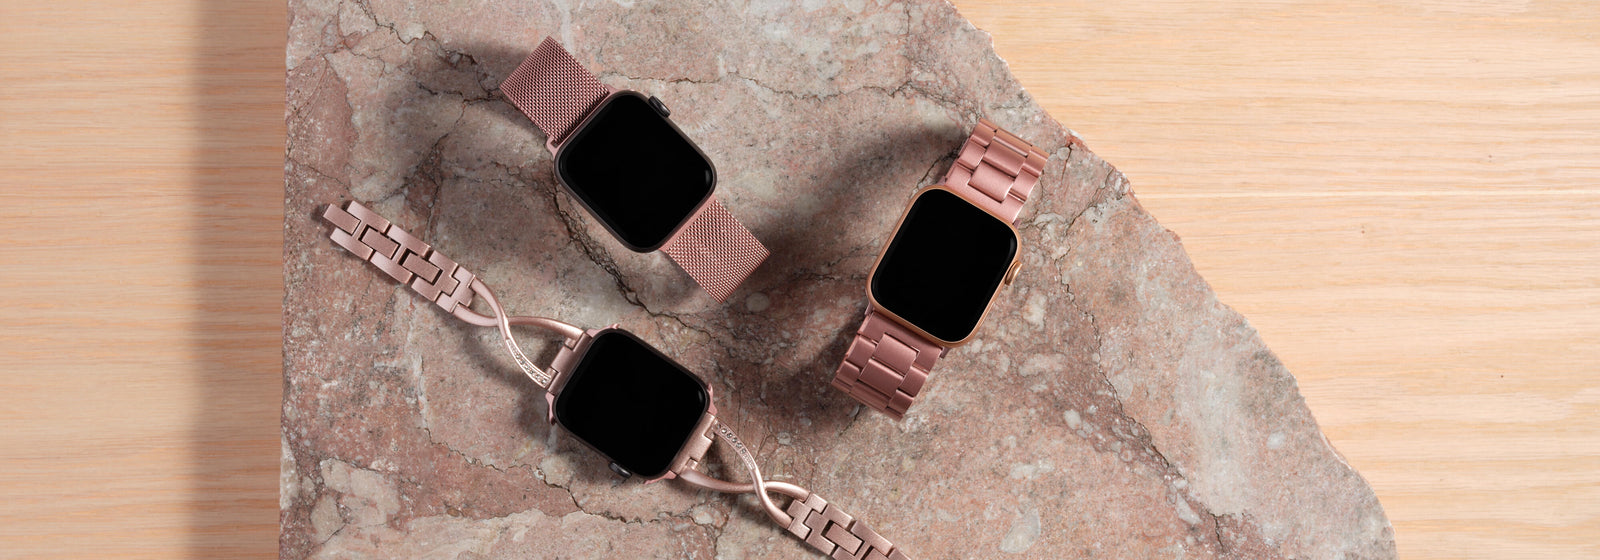 Classic Stainless Steel Apple Watch Band in Gold - The Salty Fox